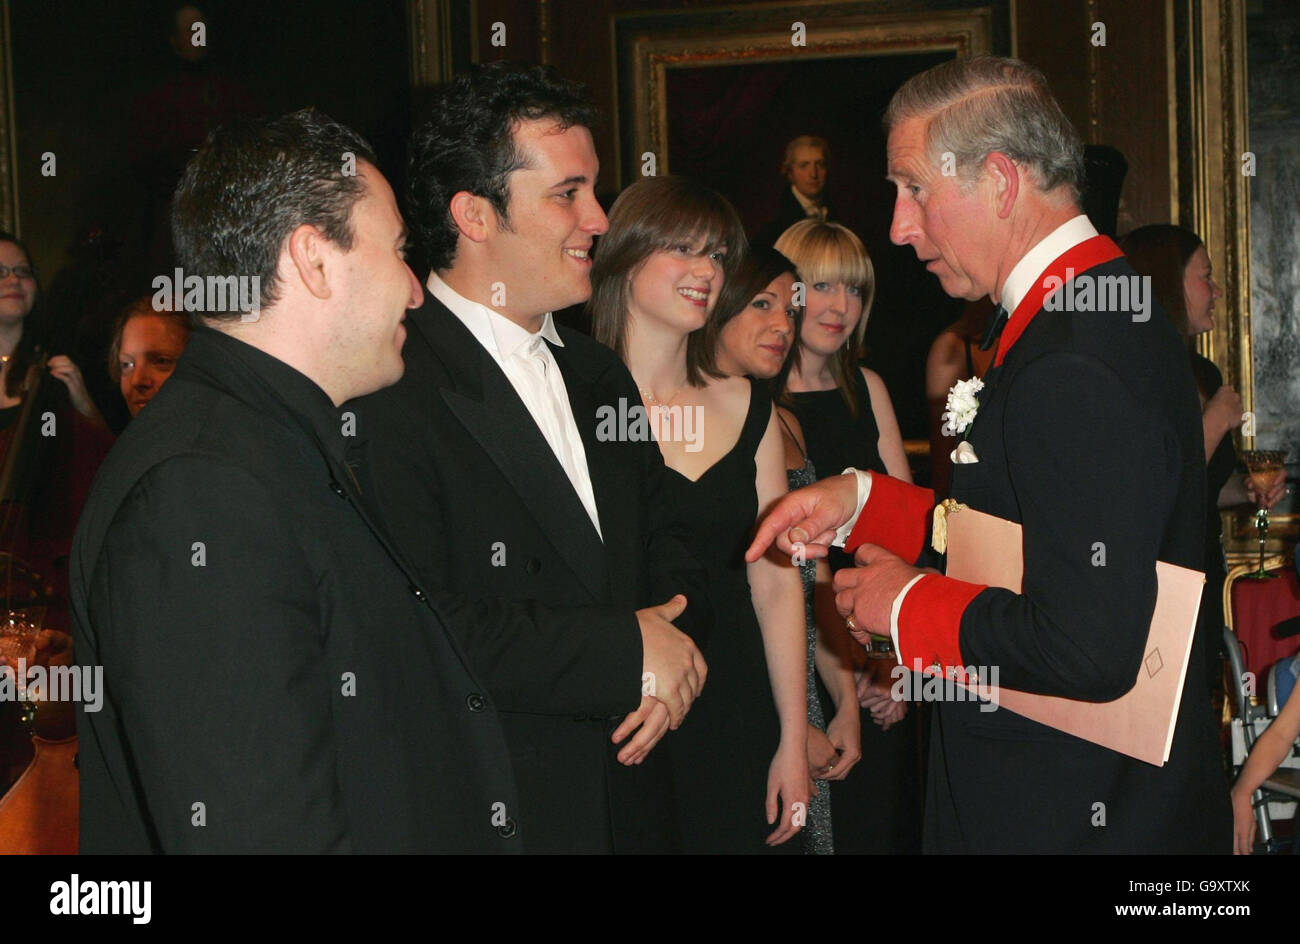 The Prince of Wales Prince of Wales meets Maxin Vergerov, a violinist, and Igor Levit, a pianist who were the main preformers at a concert in which celebrated the 30th anniversary of Live Music Now at Windsor Castle. Stock Photo